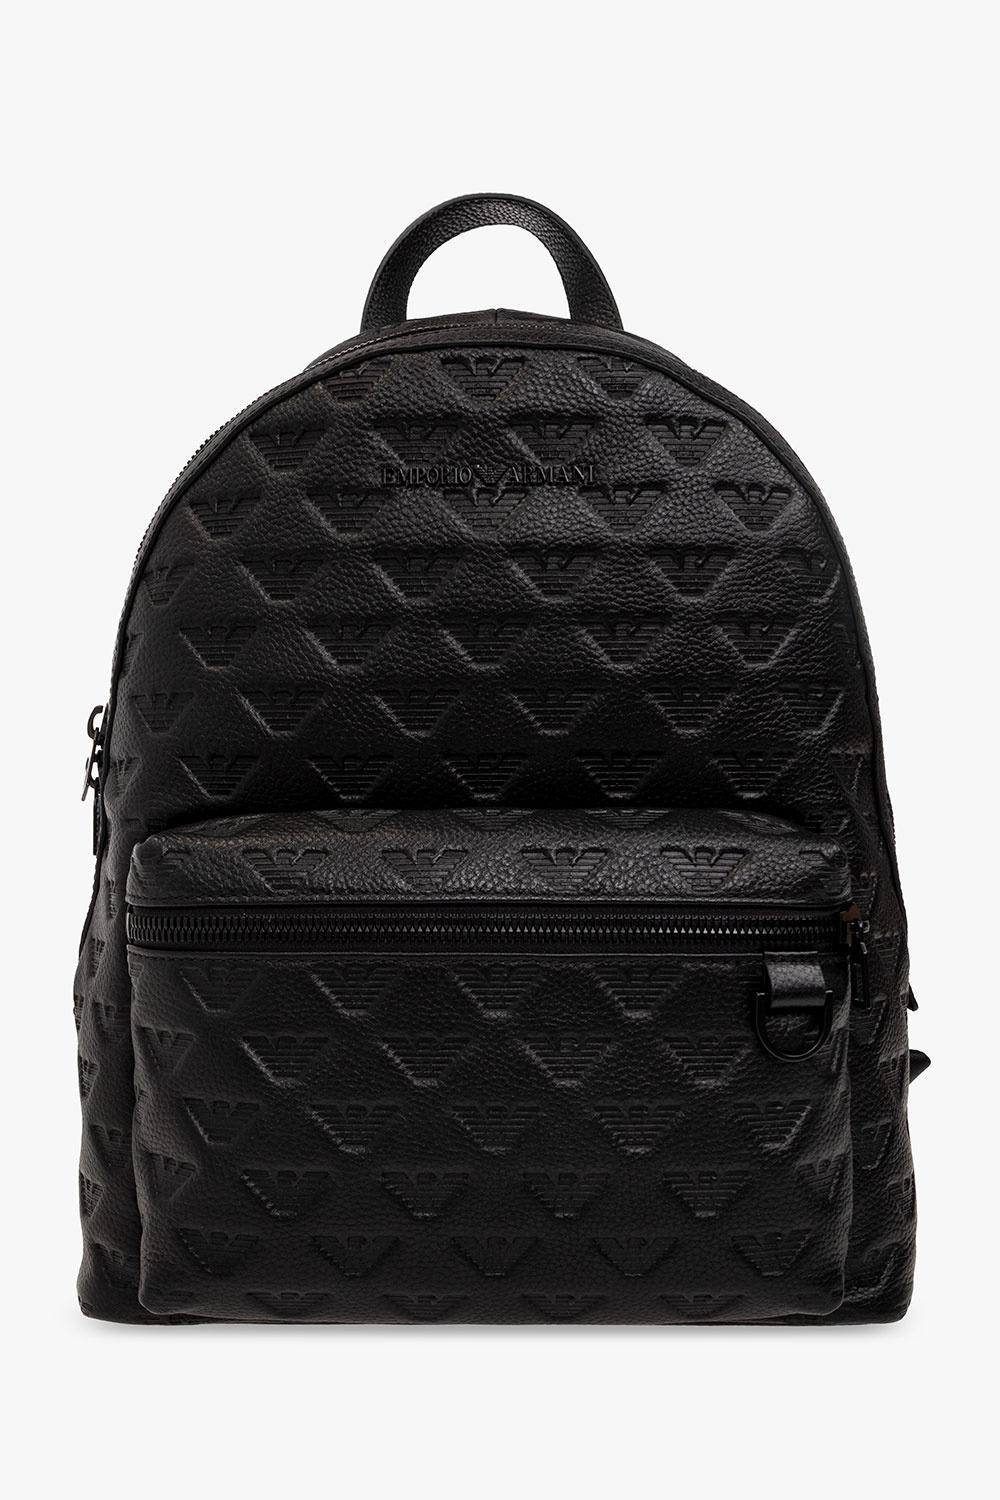 Emporio Armani Embossed Leather Backpack In Nero